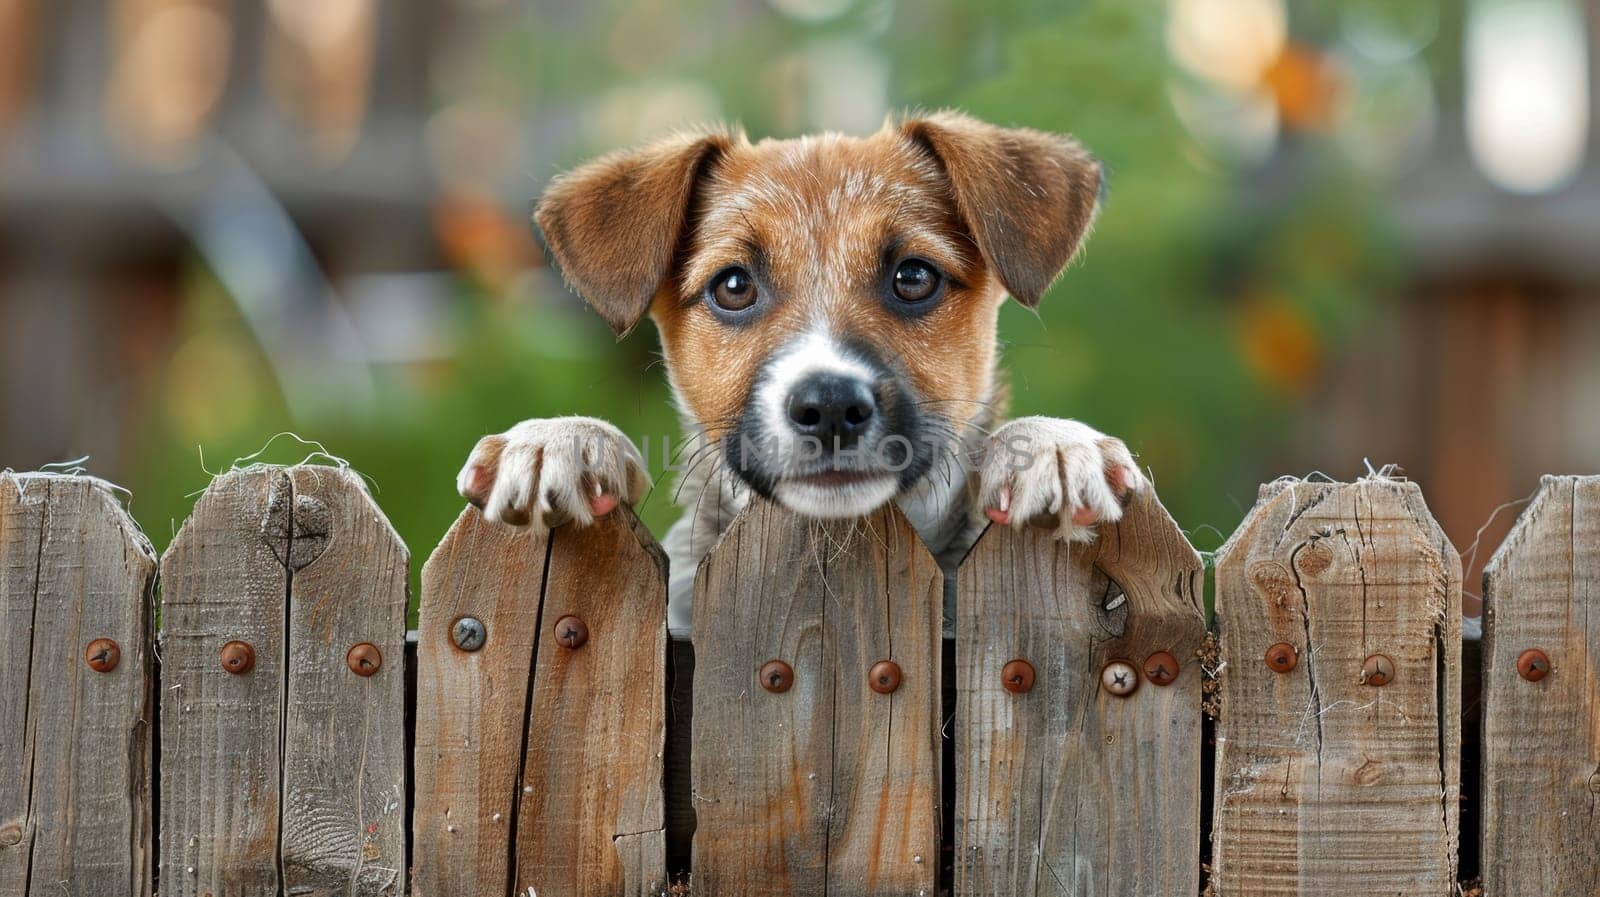 A dog peeking over a wooden fence with its paws on the top